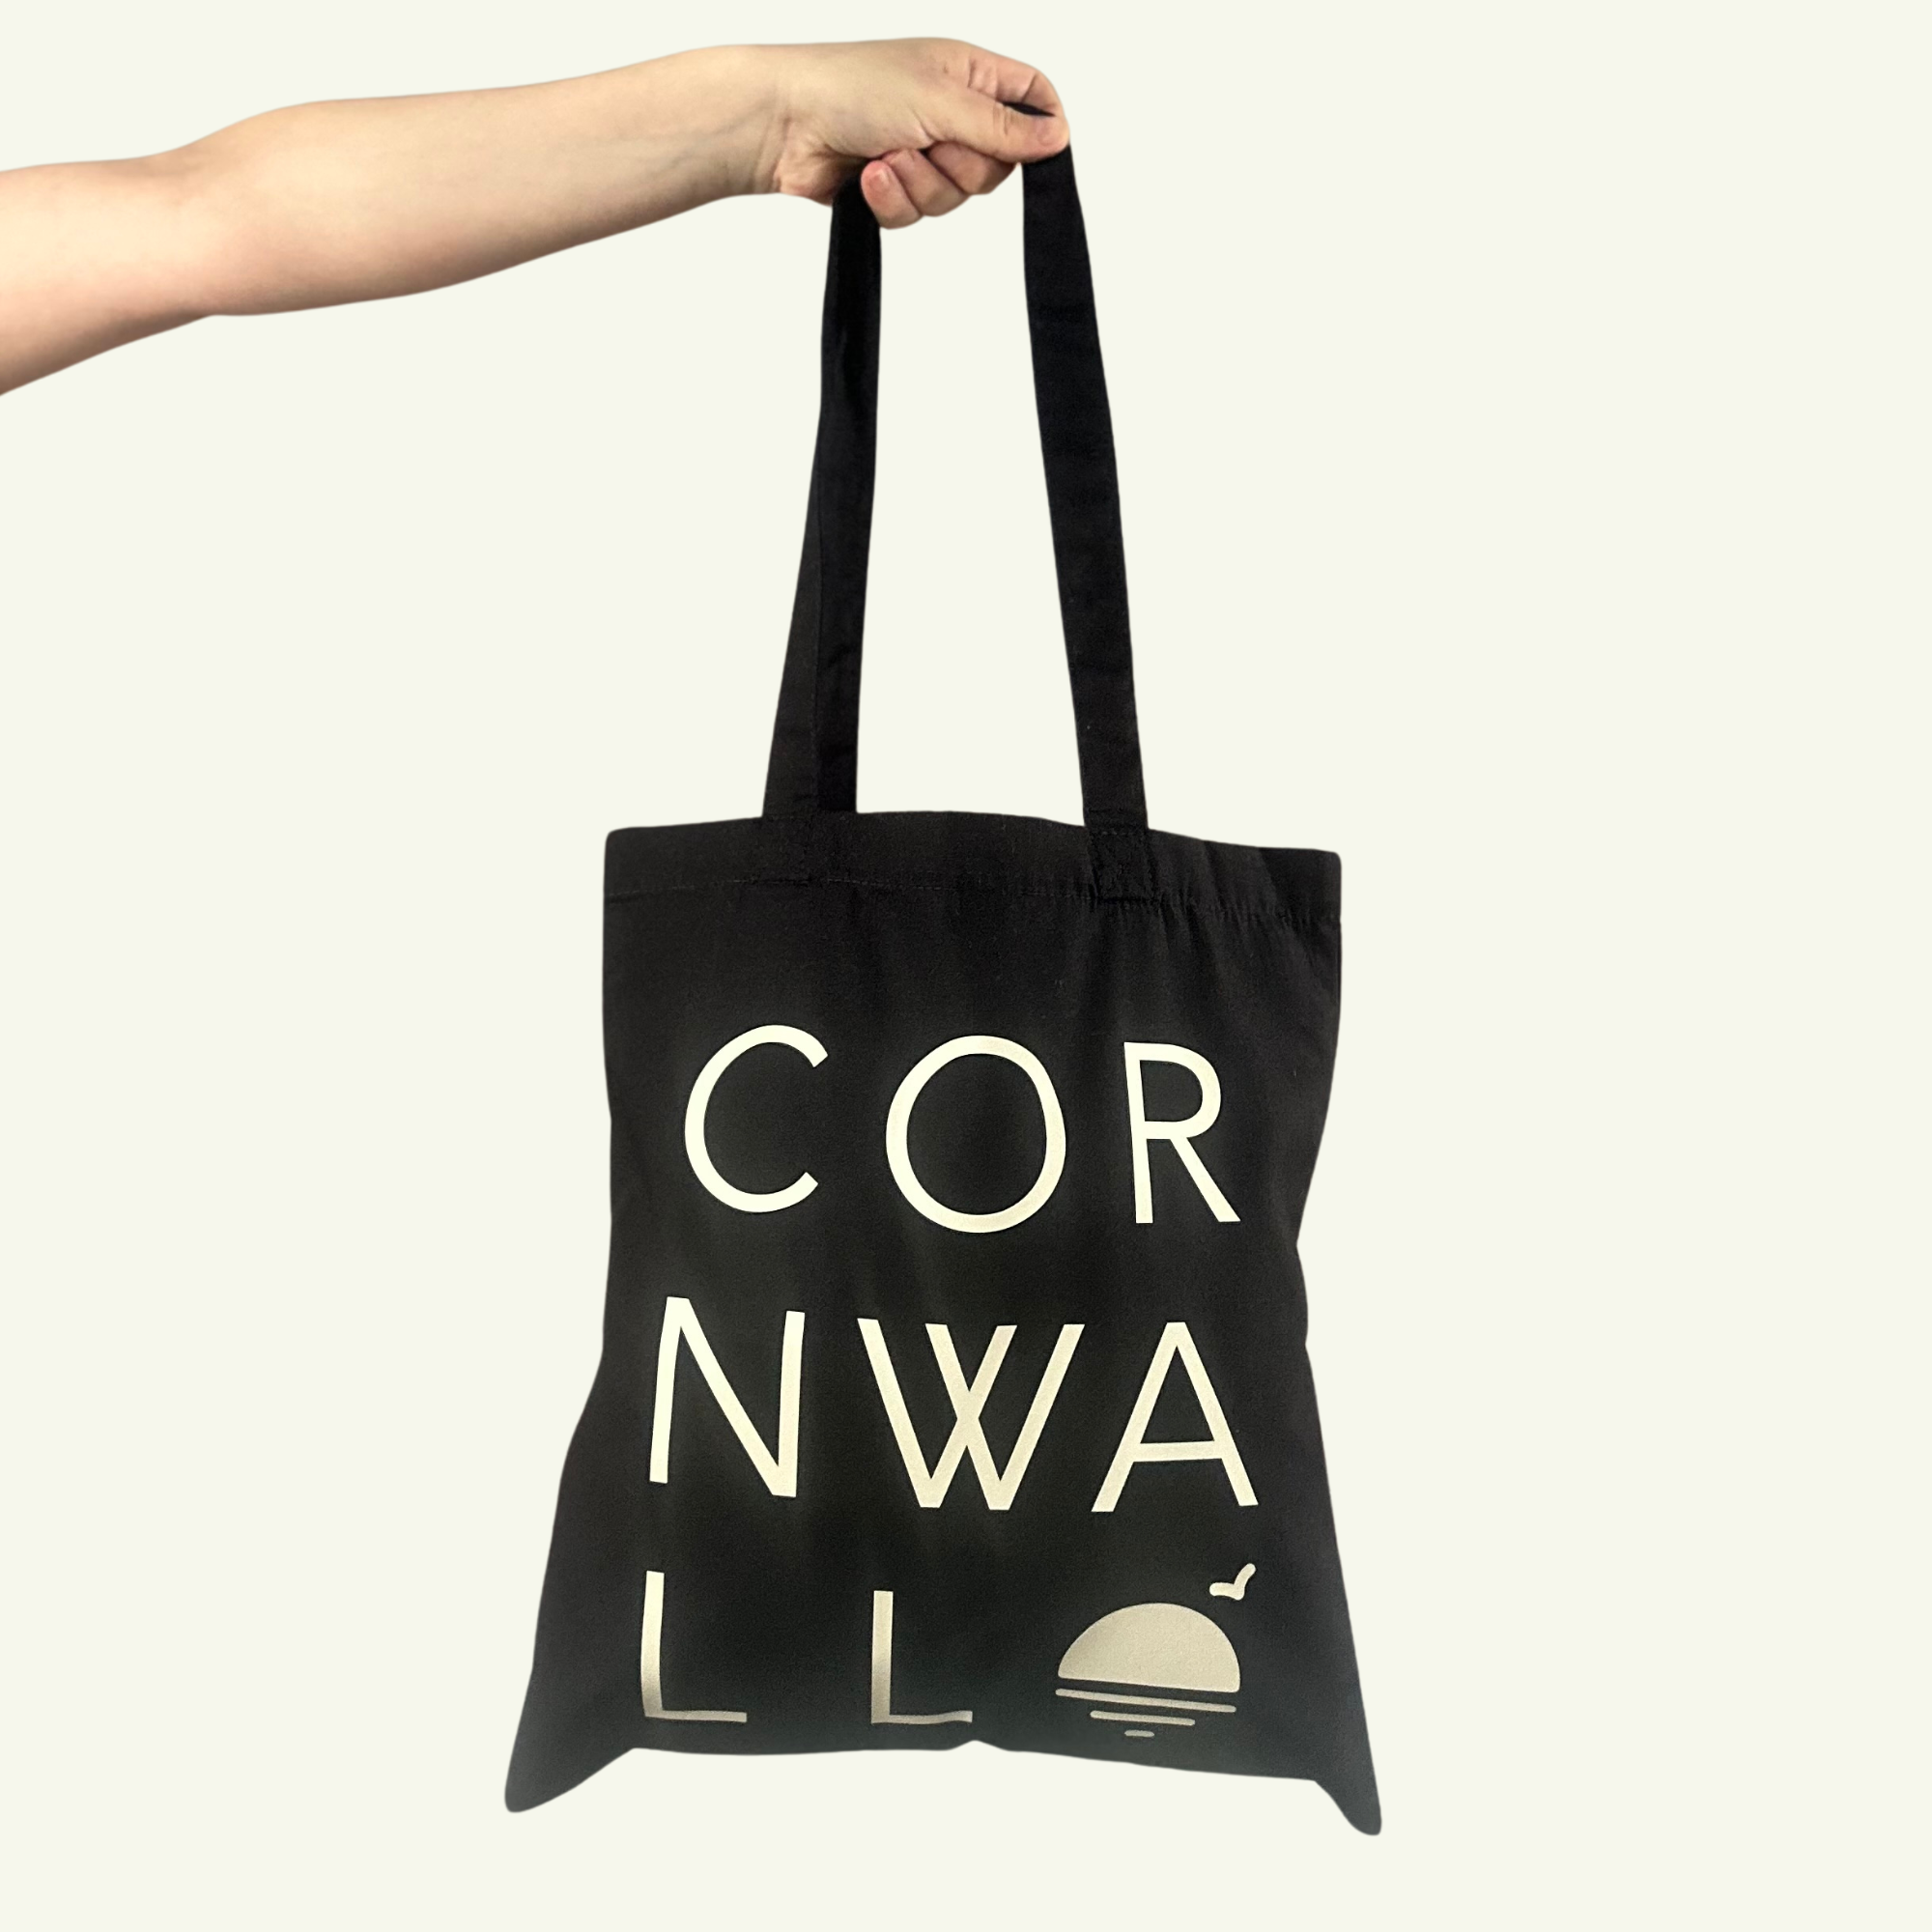 Cornwall Graphic Text Tote